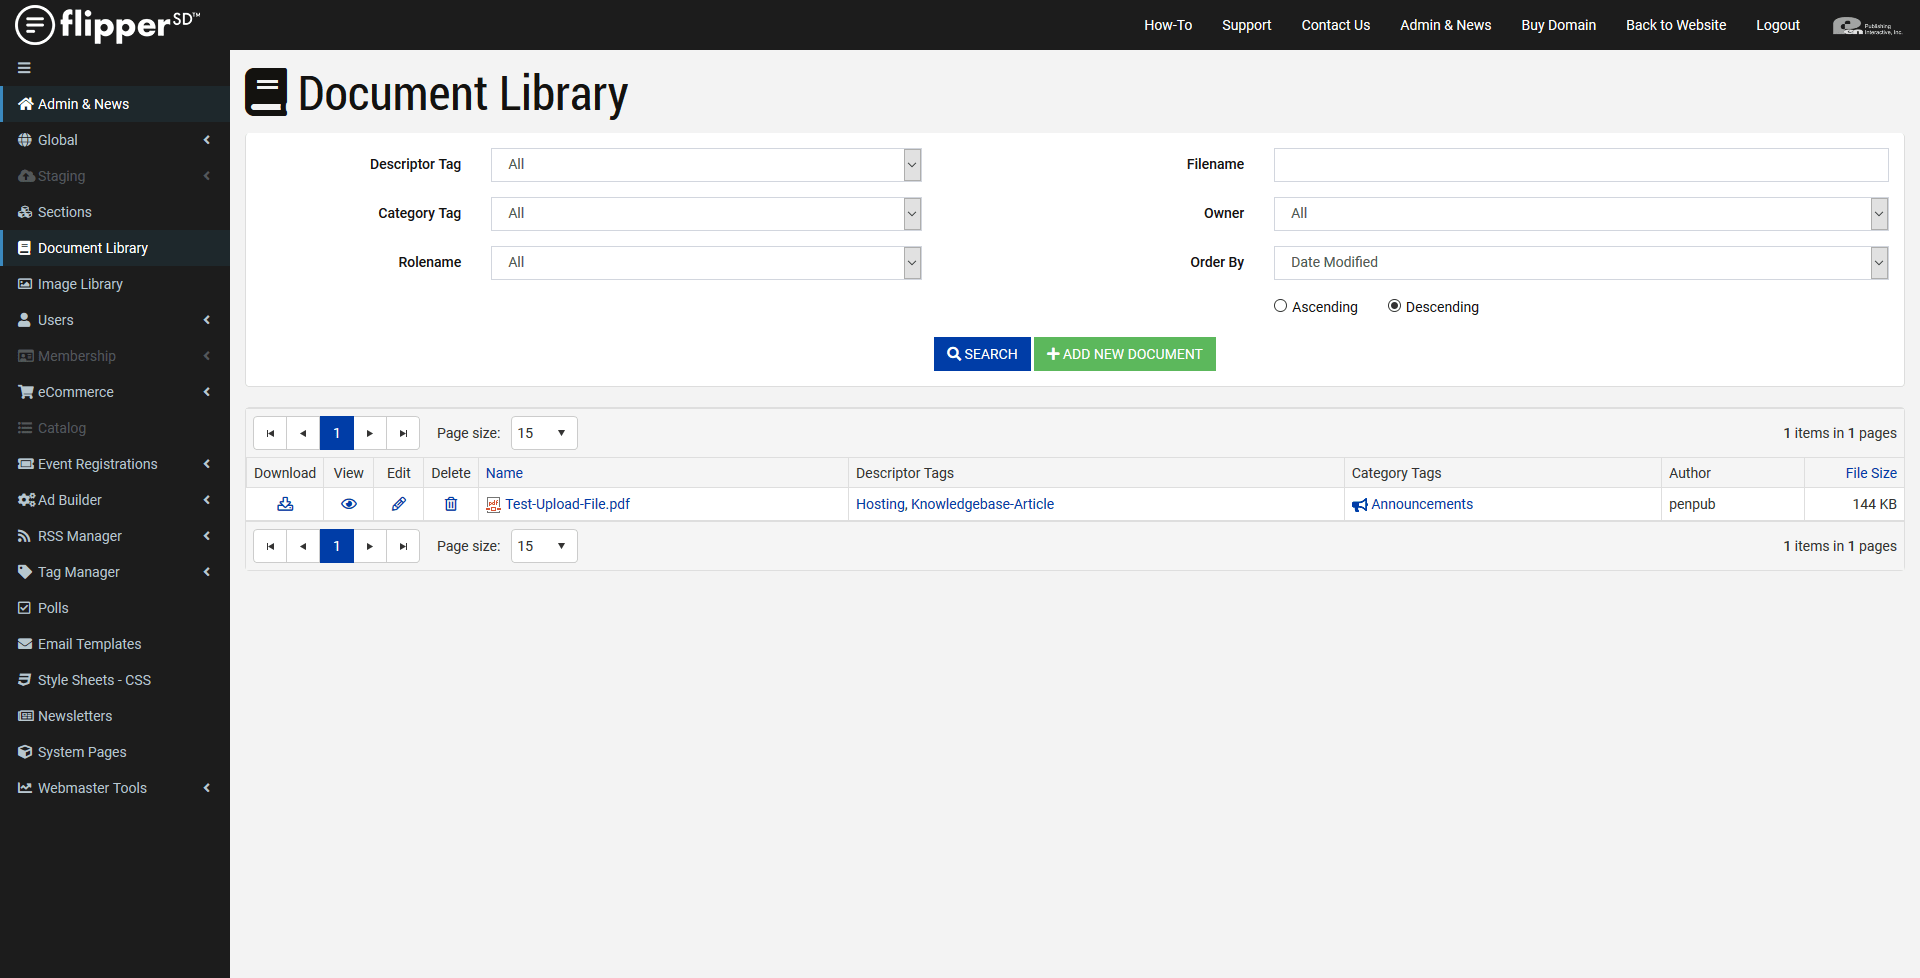 DocumentLibrary-Overview